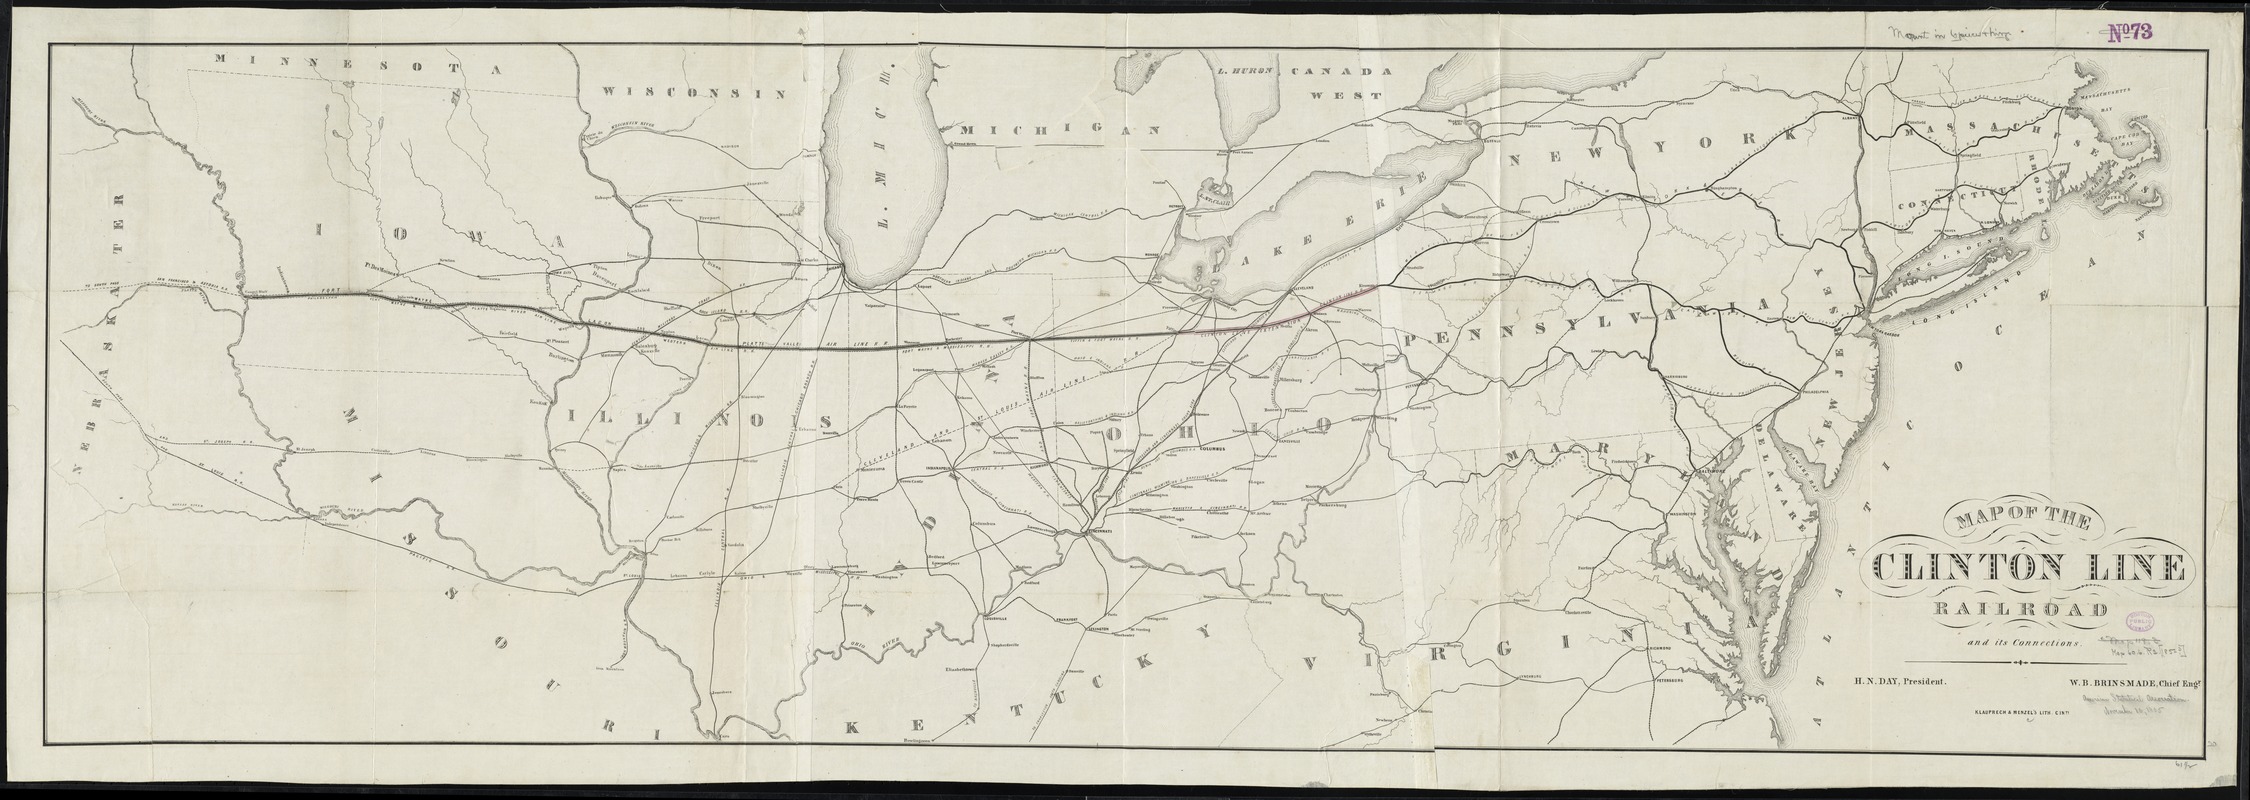 Map of the Clinton Line Railroad and its connections